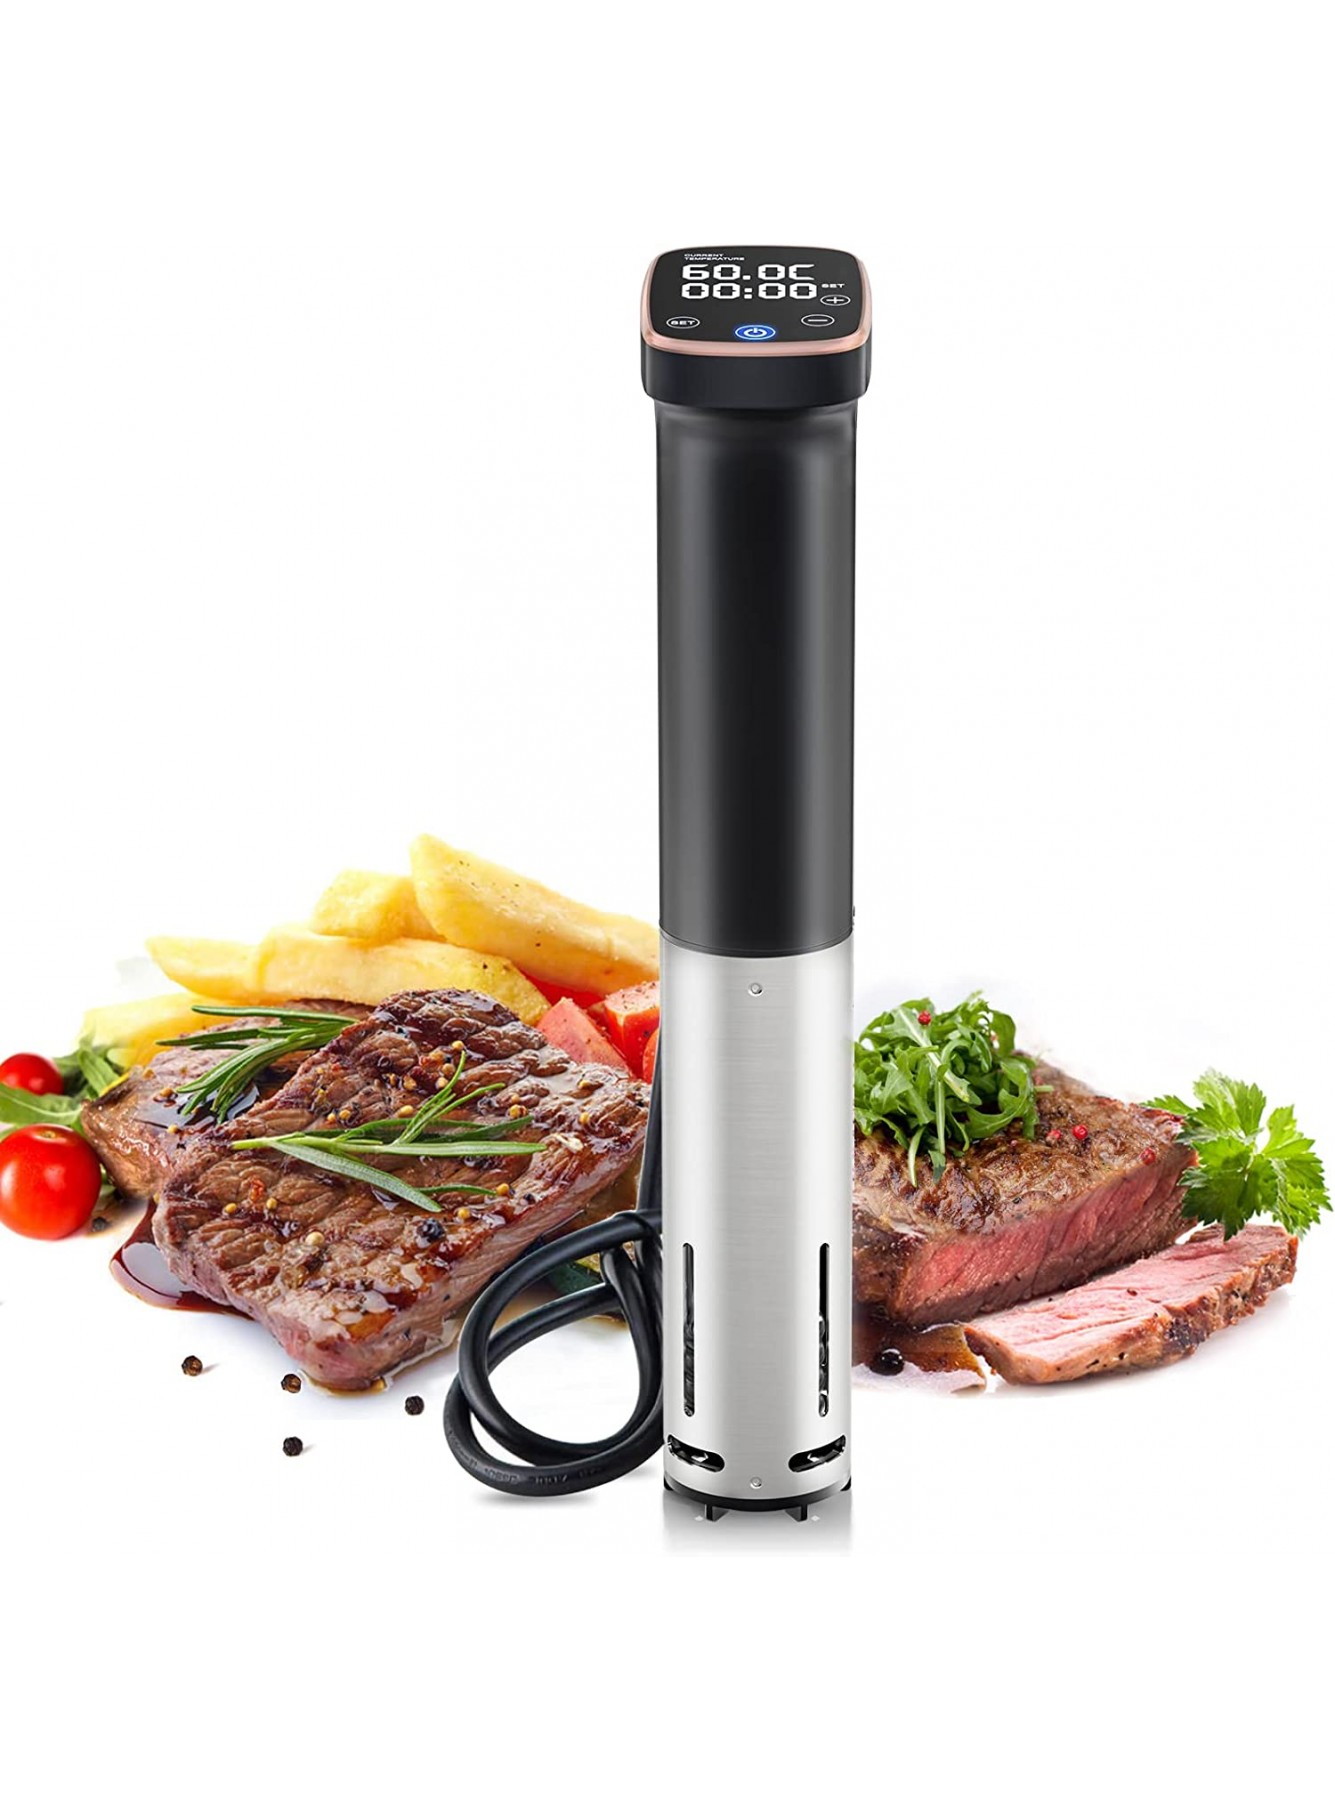 OOIIOR Sous Vide 1100W Sous Vide Precision Cooker IPX7 Waterproof Sous Vide Machine Ultra-Quiet Fast-Heating Immersion Circulator with Digital Timer & Temperature Control B09WYRNGJZ